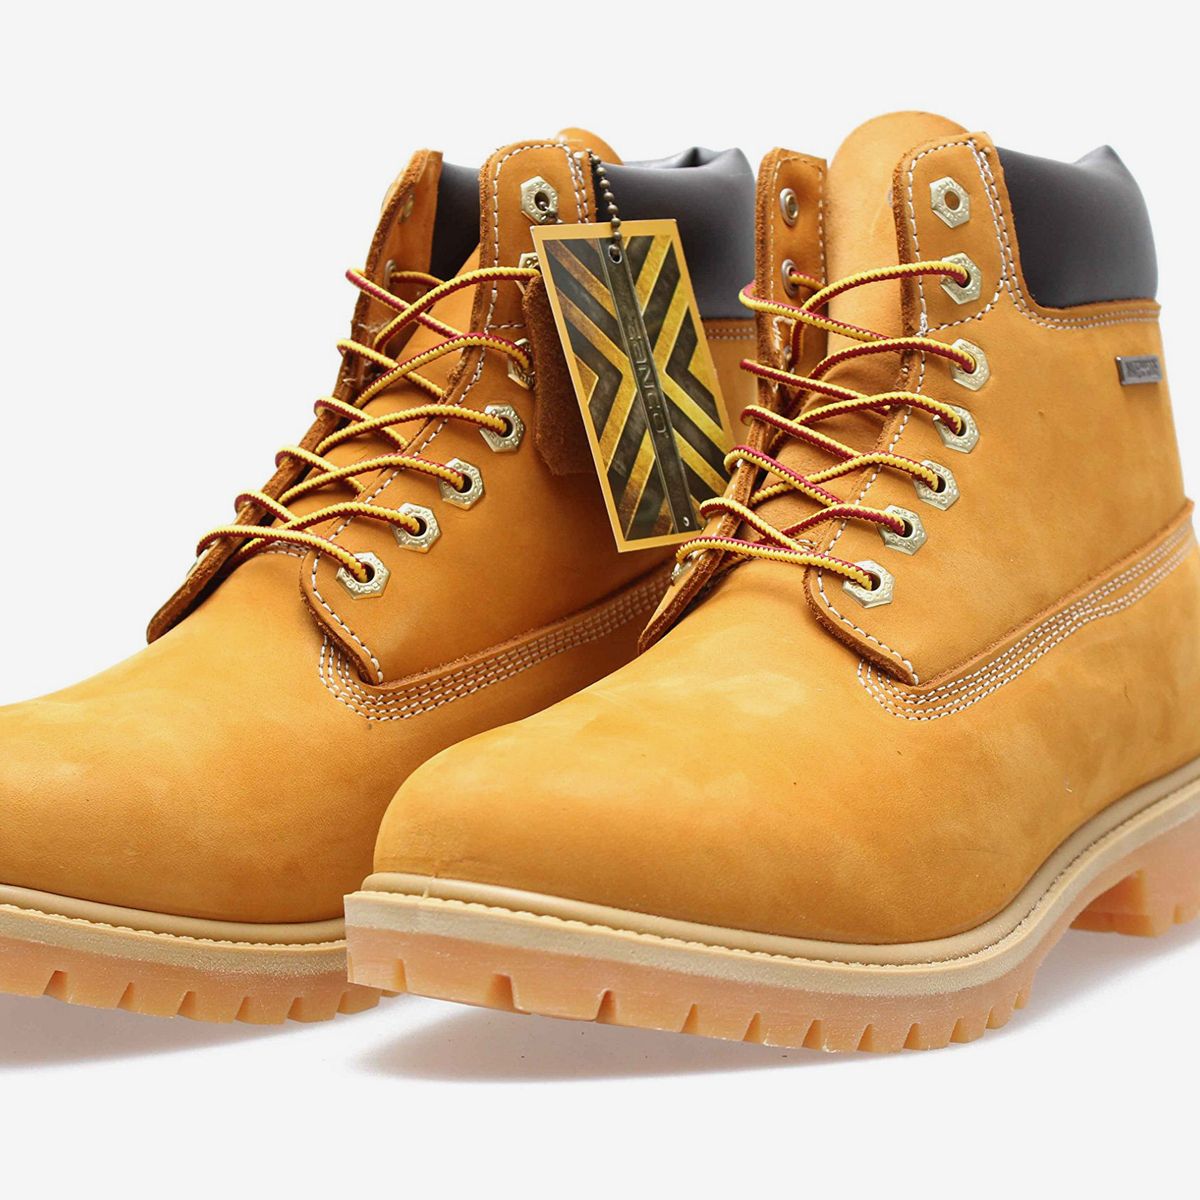 15 Best Work Boots for Men 2020 | The 